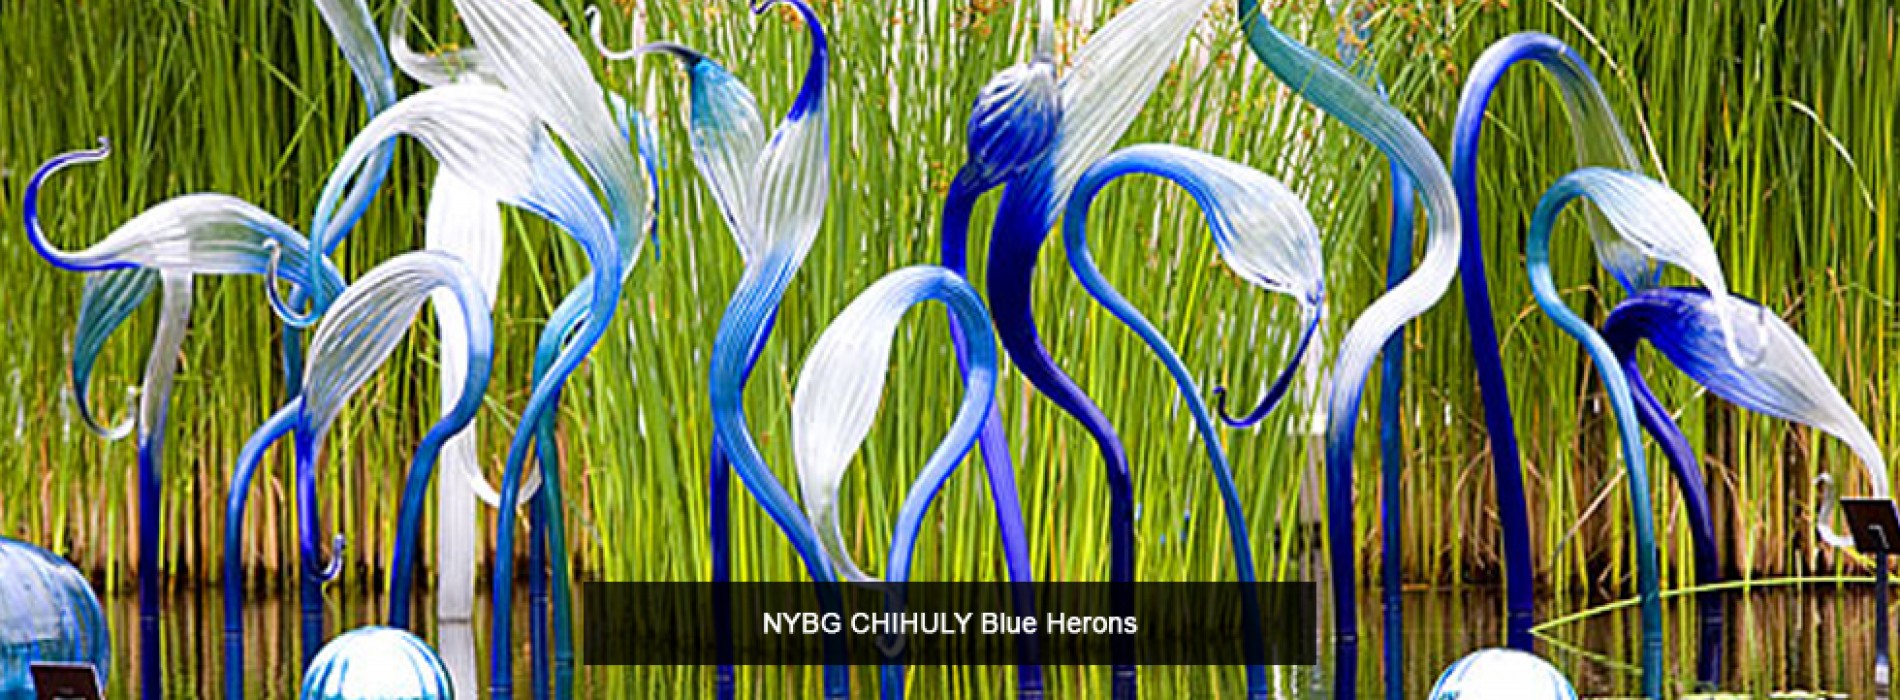 New and exciting CHIHULY experience to debut in New York in Spring 2017